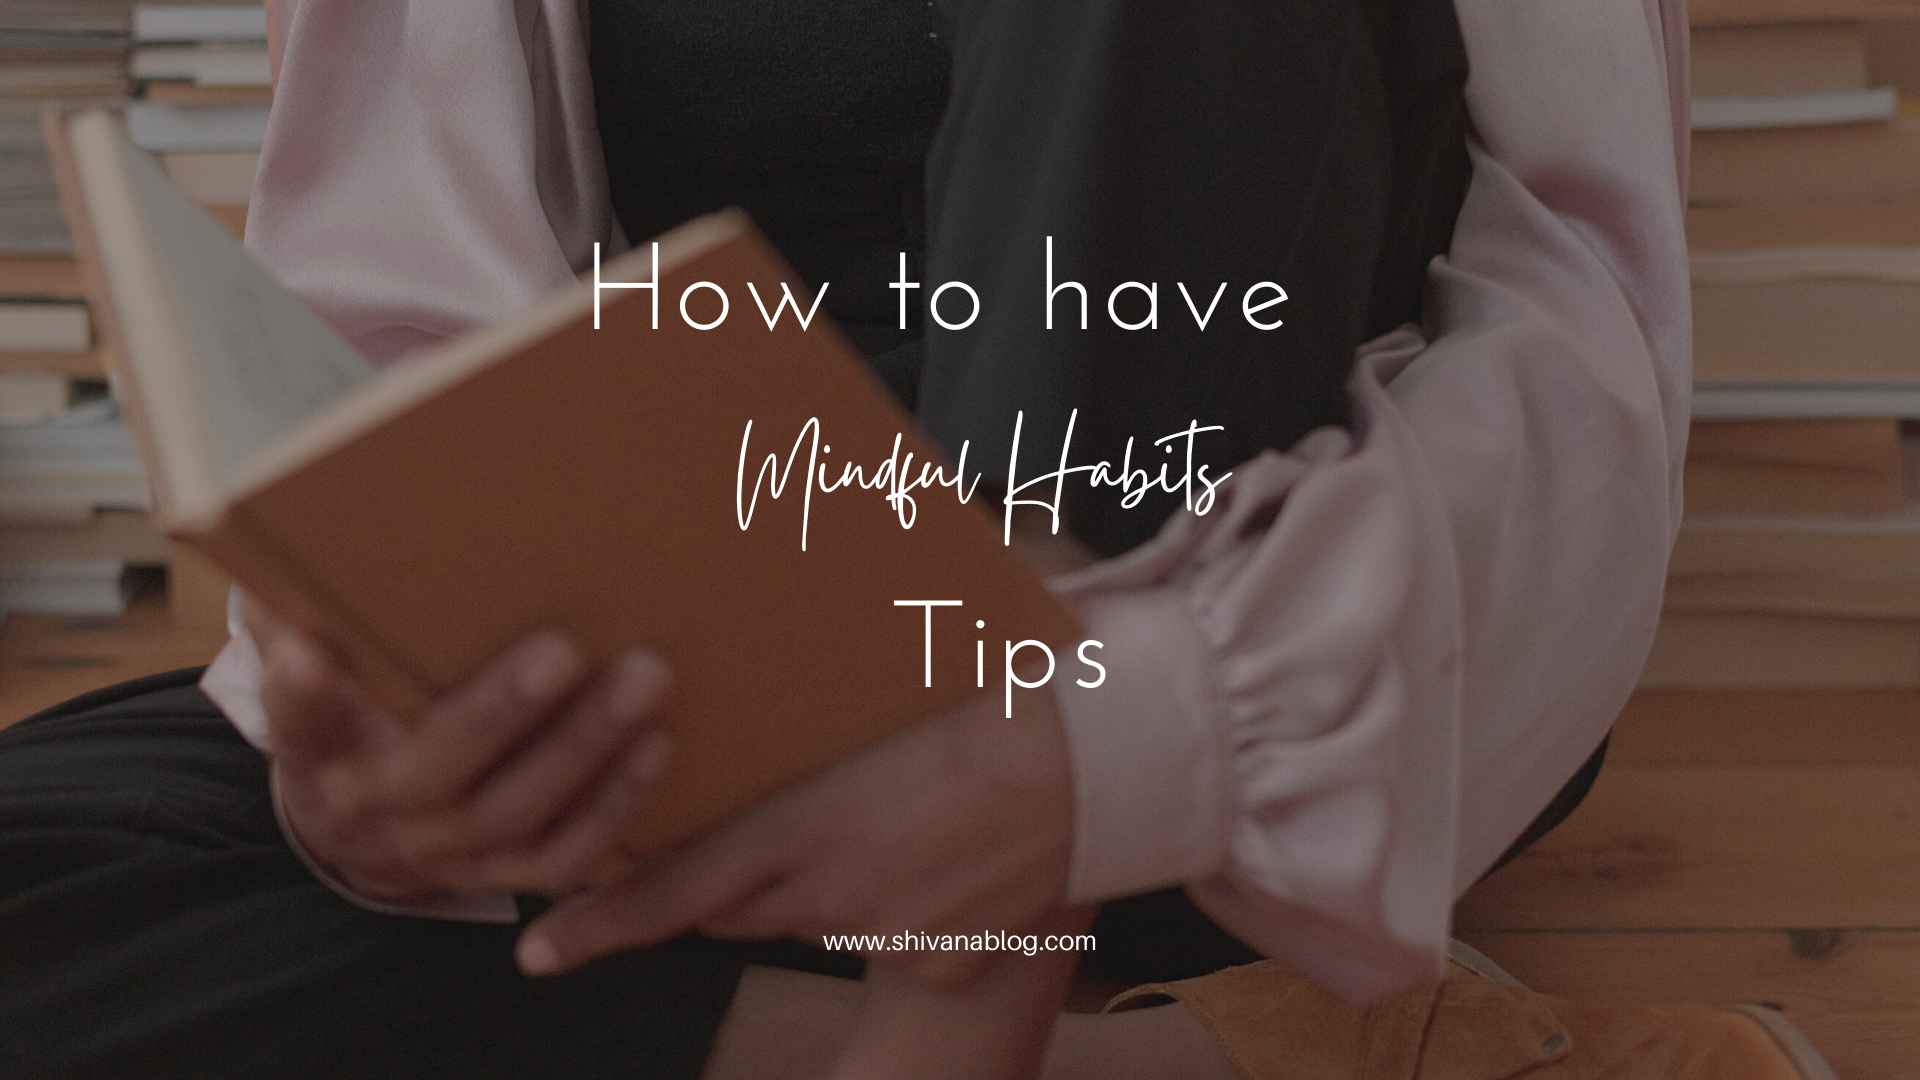 How to have mindful habits- Tips